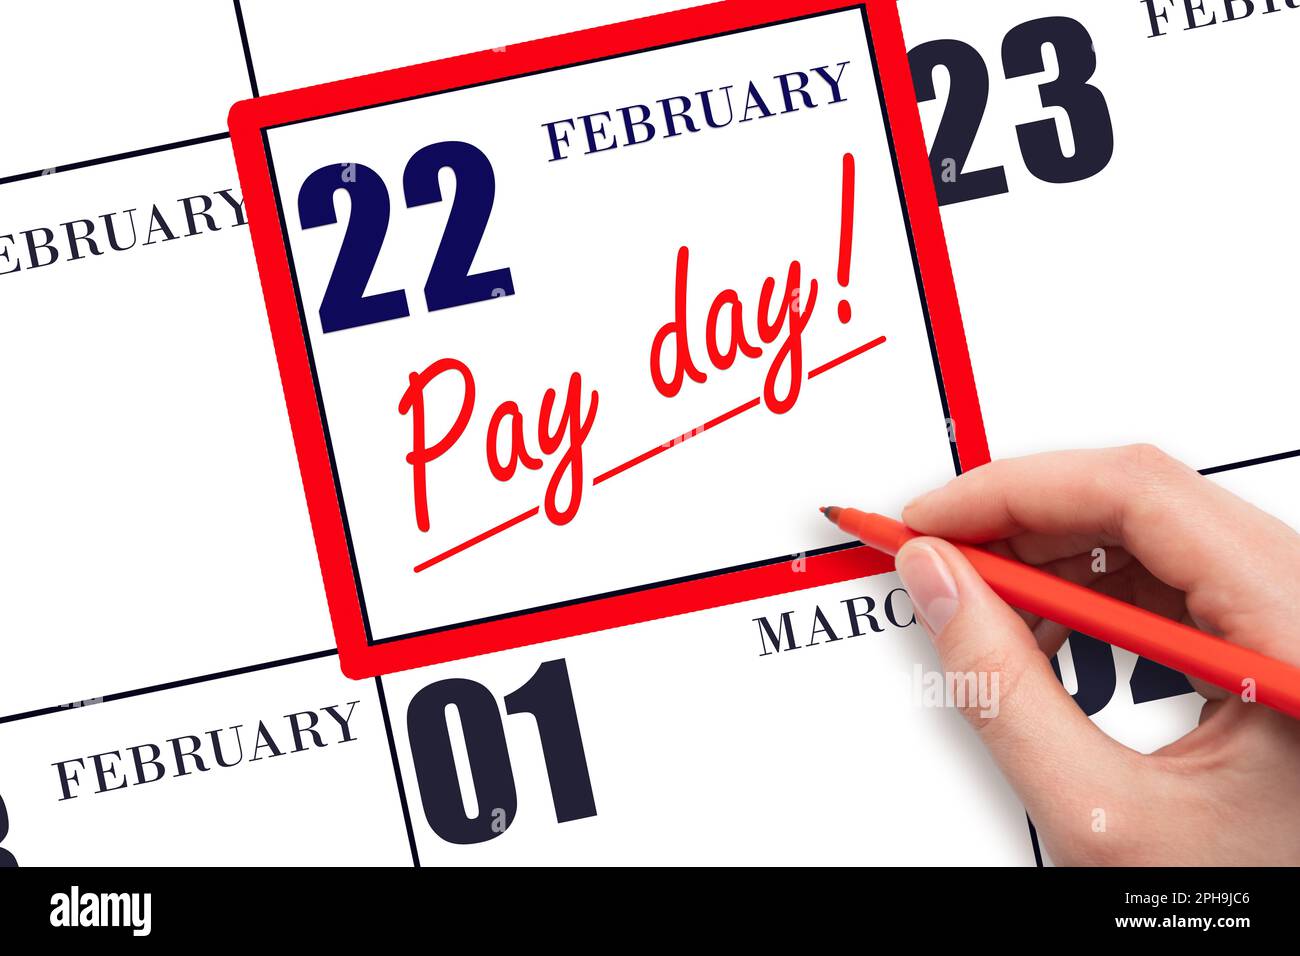 22nd day of February. Hand writing text PAY DATE on calendar date February 22 and underline it. Payment due date.  Reminder concept of payment. Winter Stock Photo